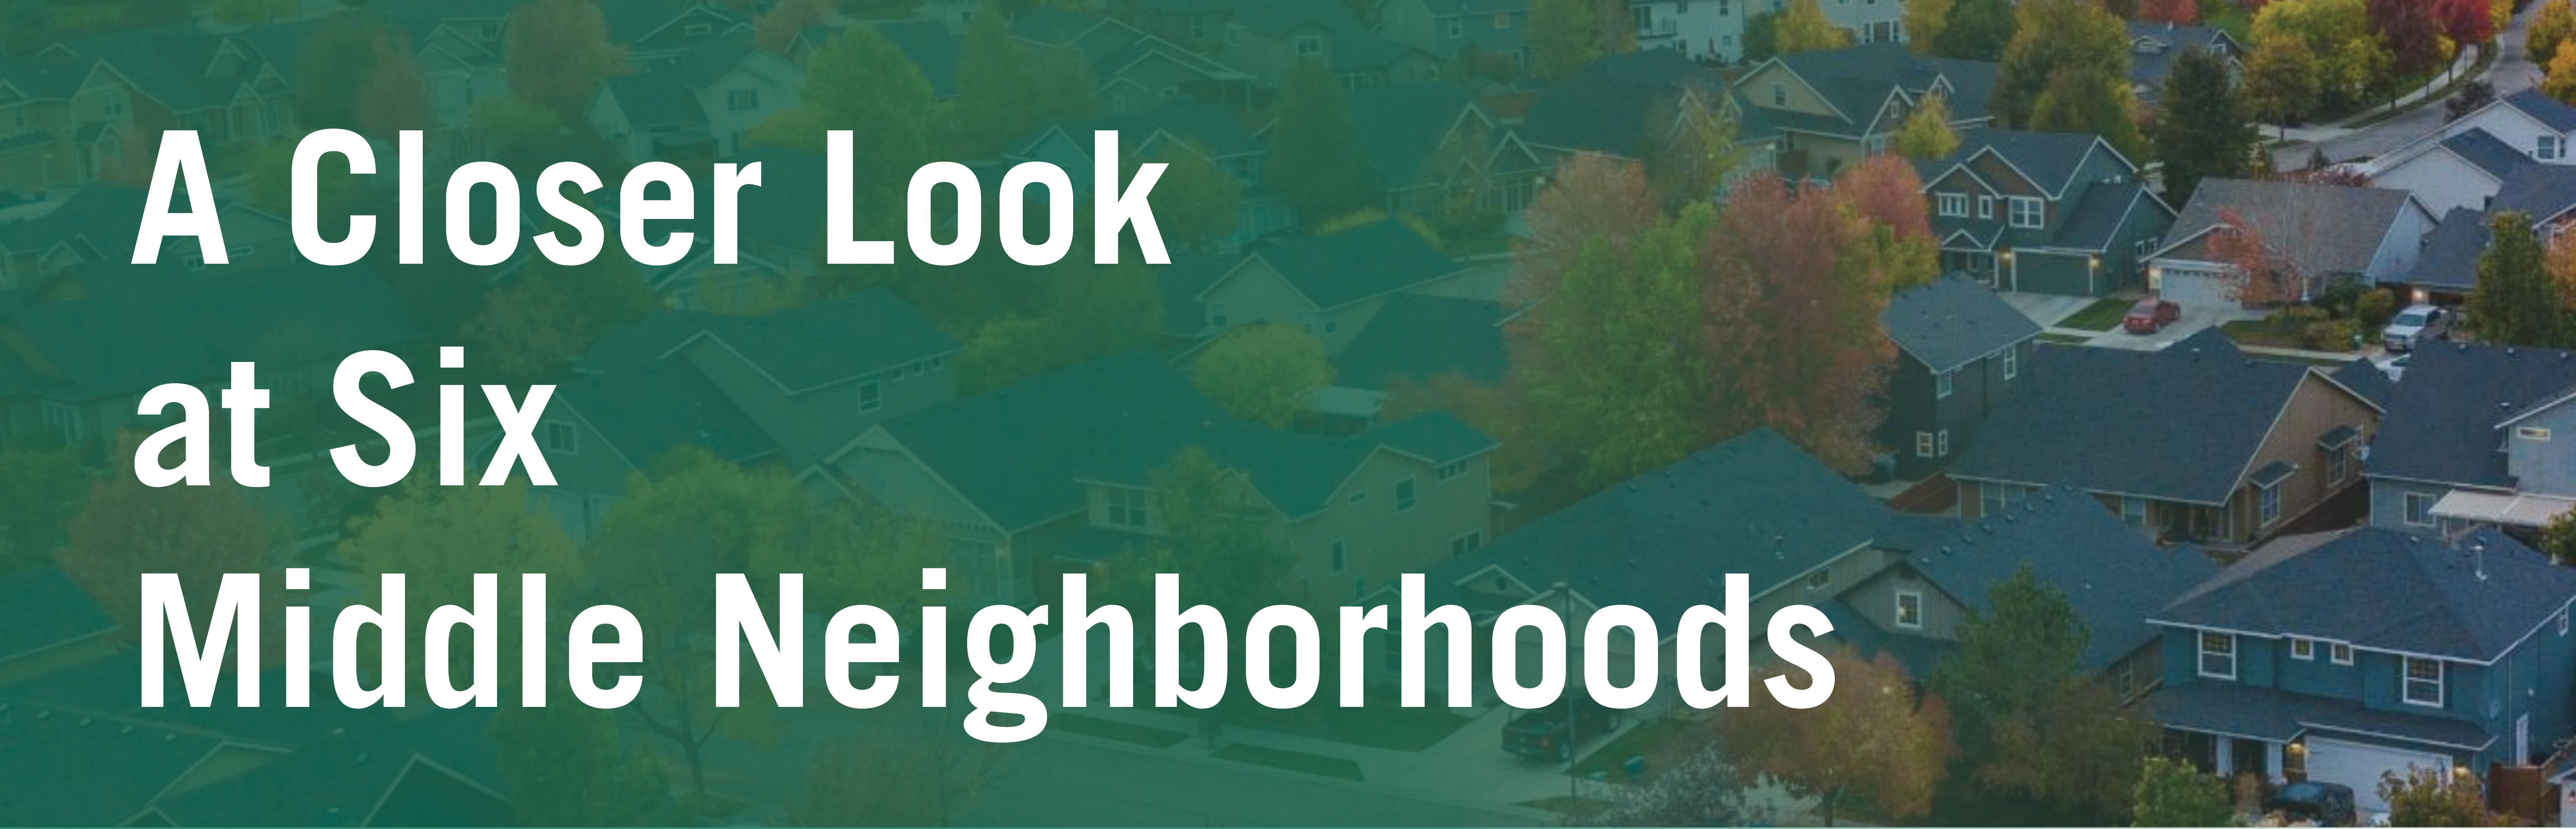 A Closer Look at Six Middle Neighborhoods